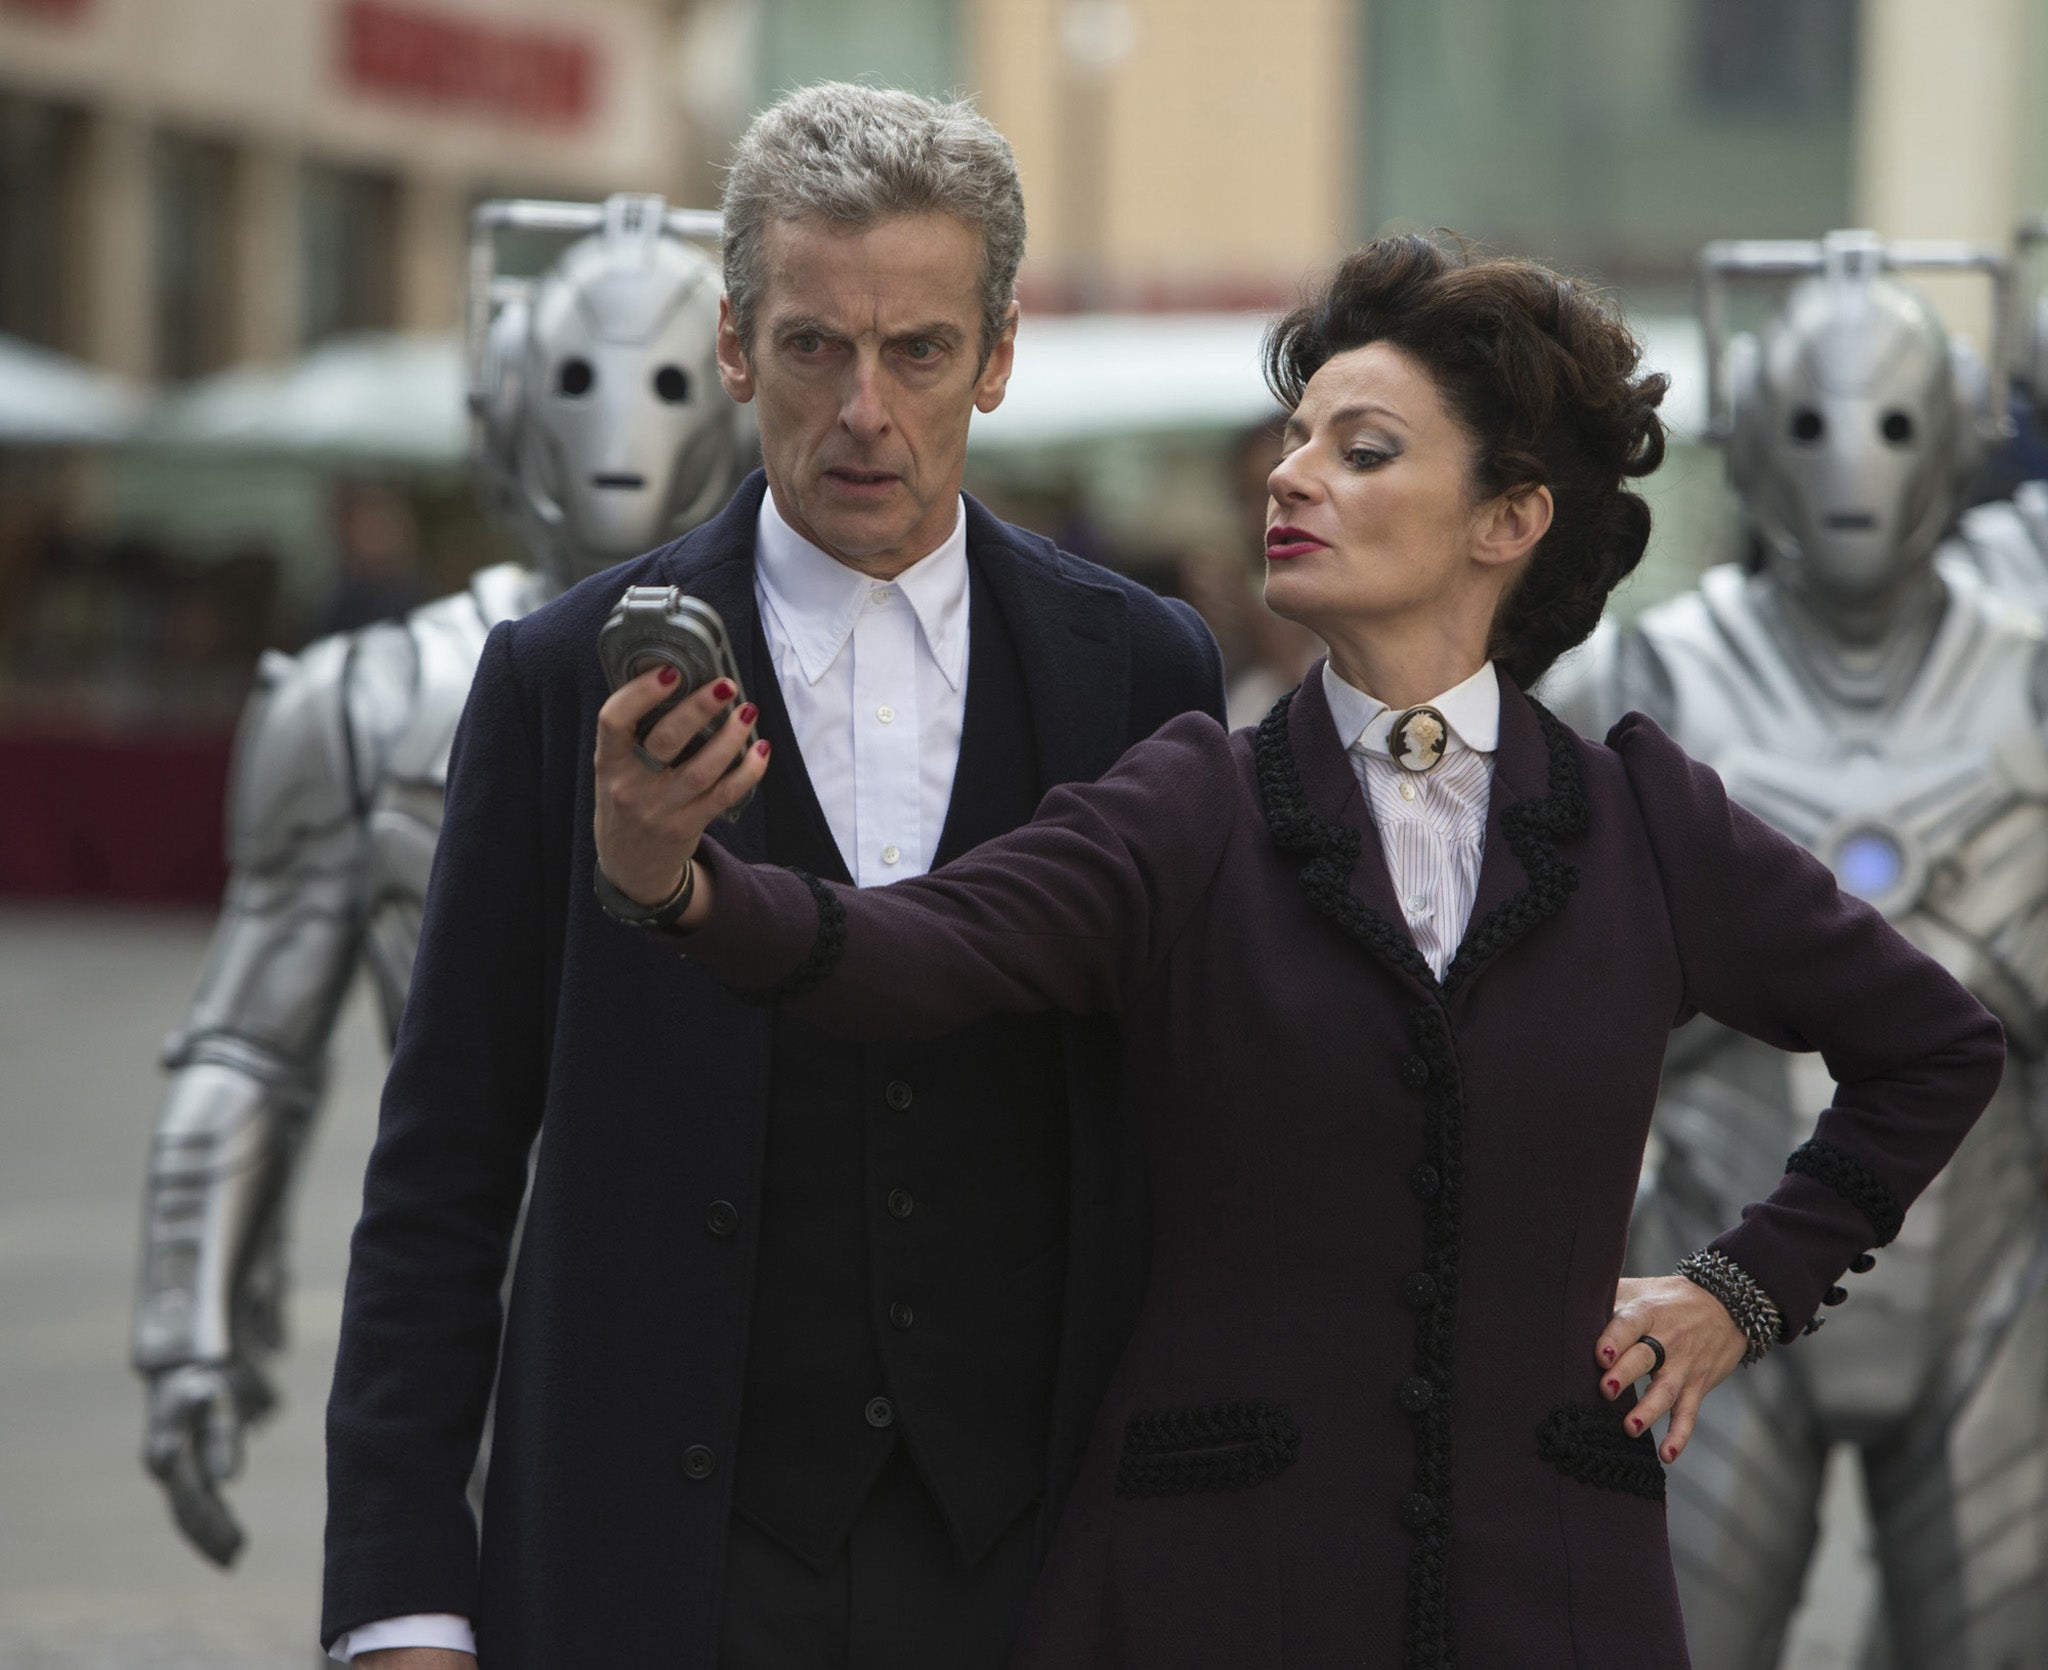 Doctor Who and Missy in the Doctor Who series 8 finale